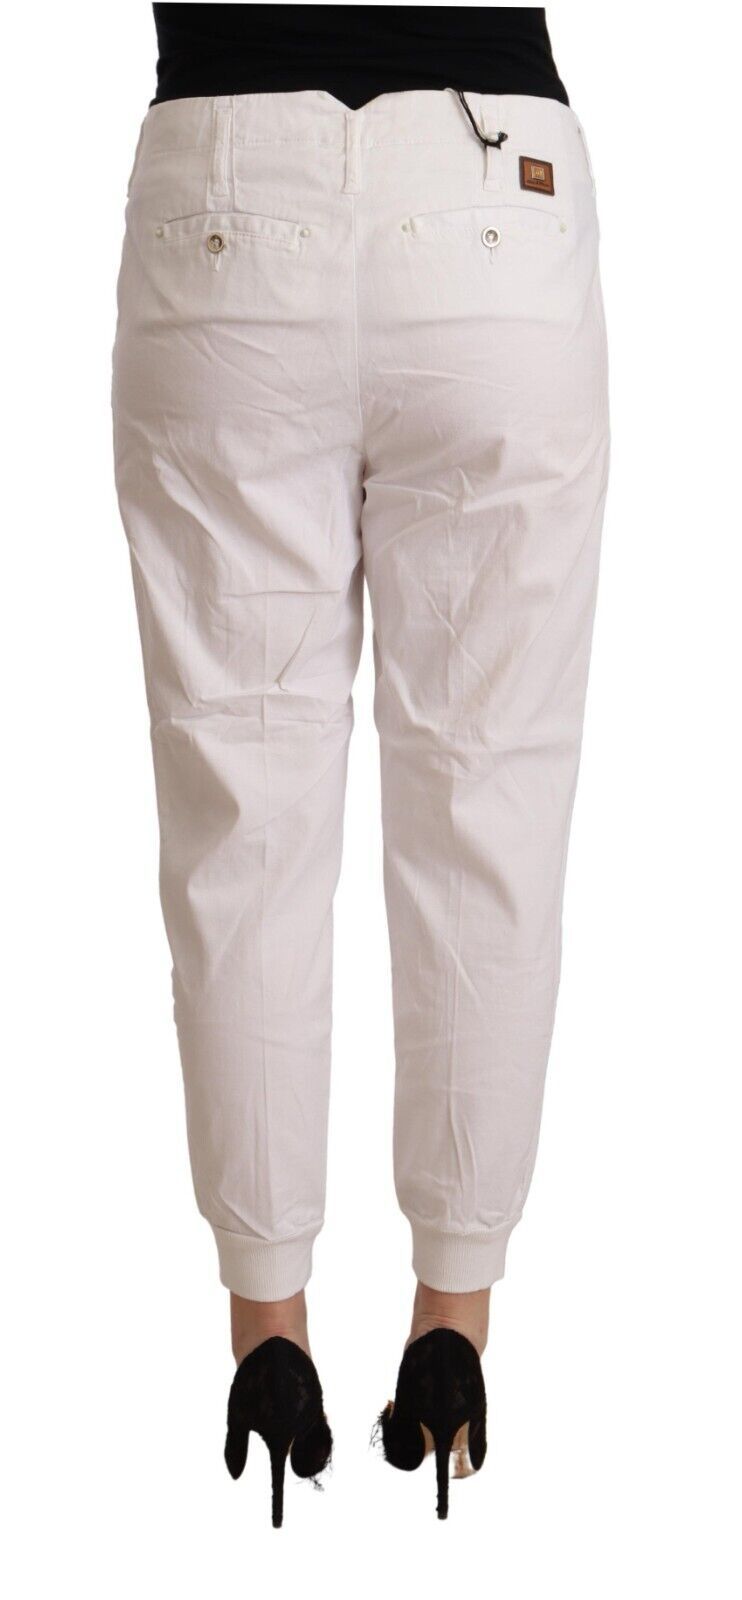 Met Chic White Tapered Cropped Women's Pants